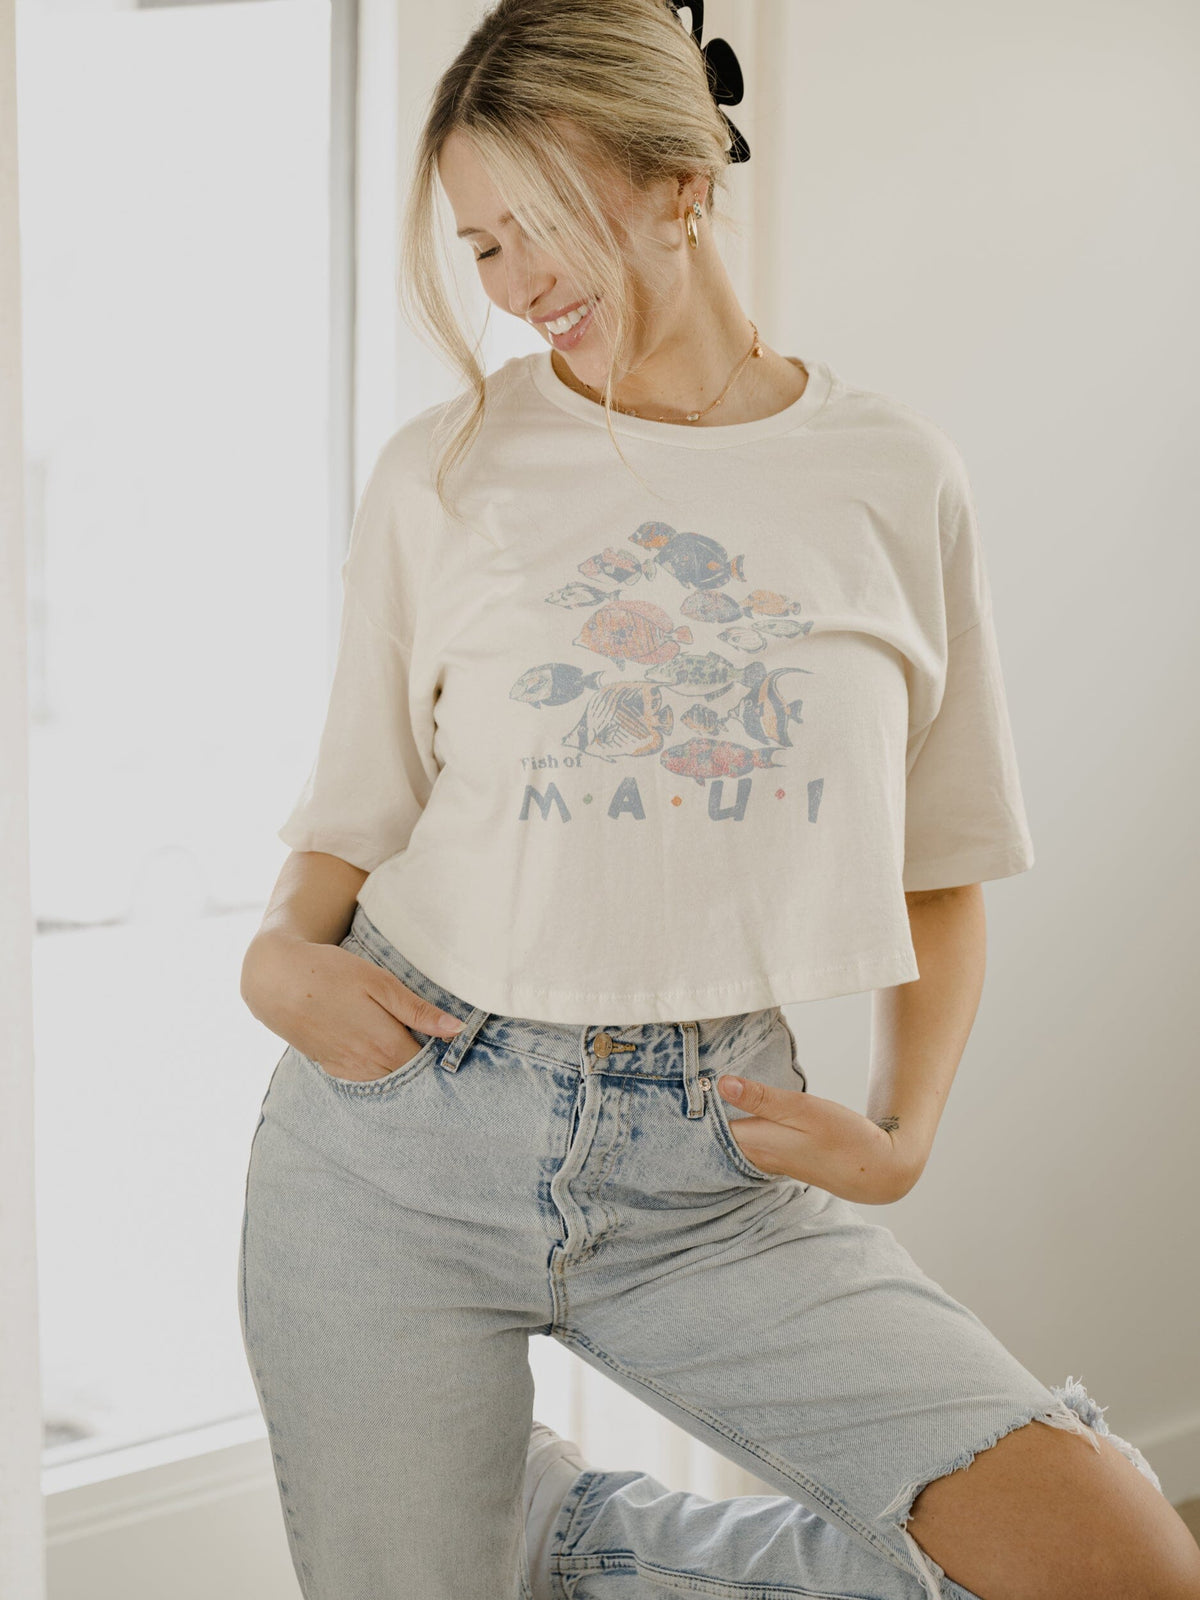 Fish of Maui Off White Cropped Tee